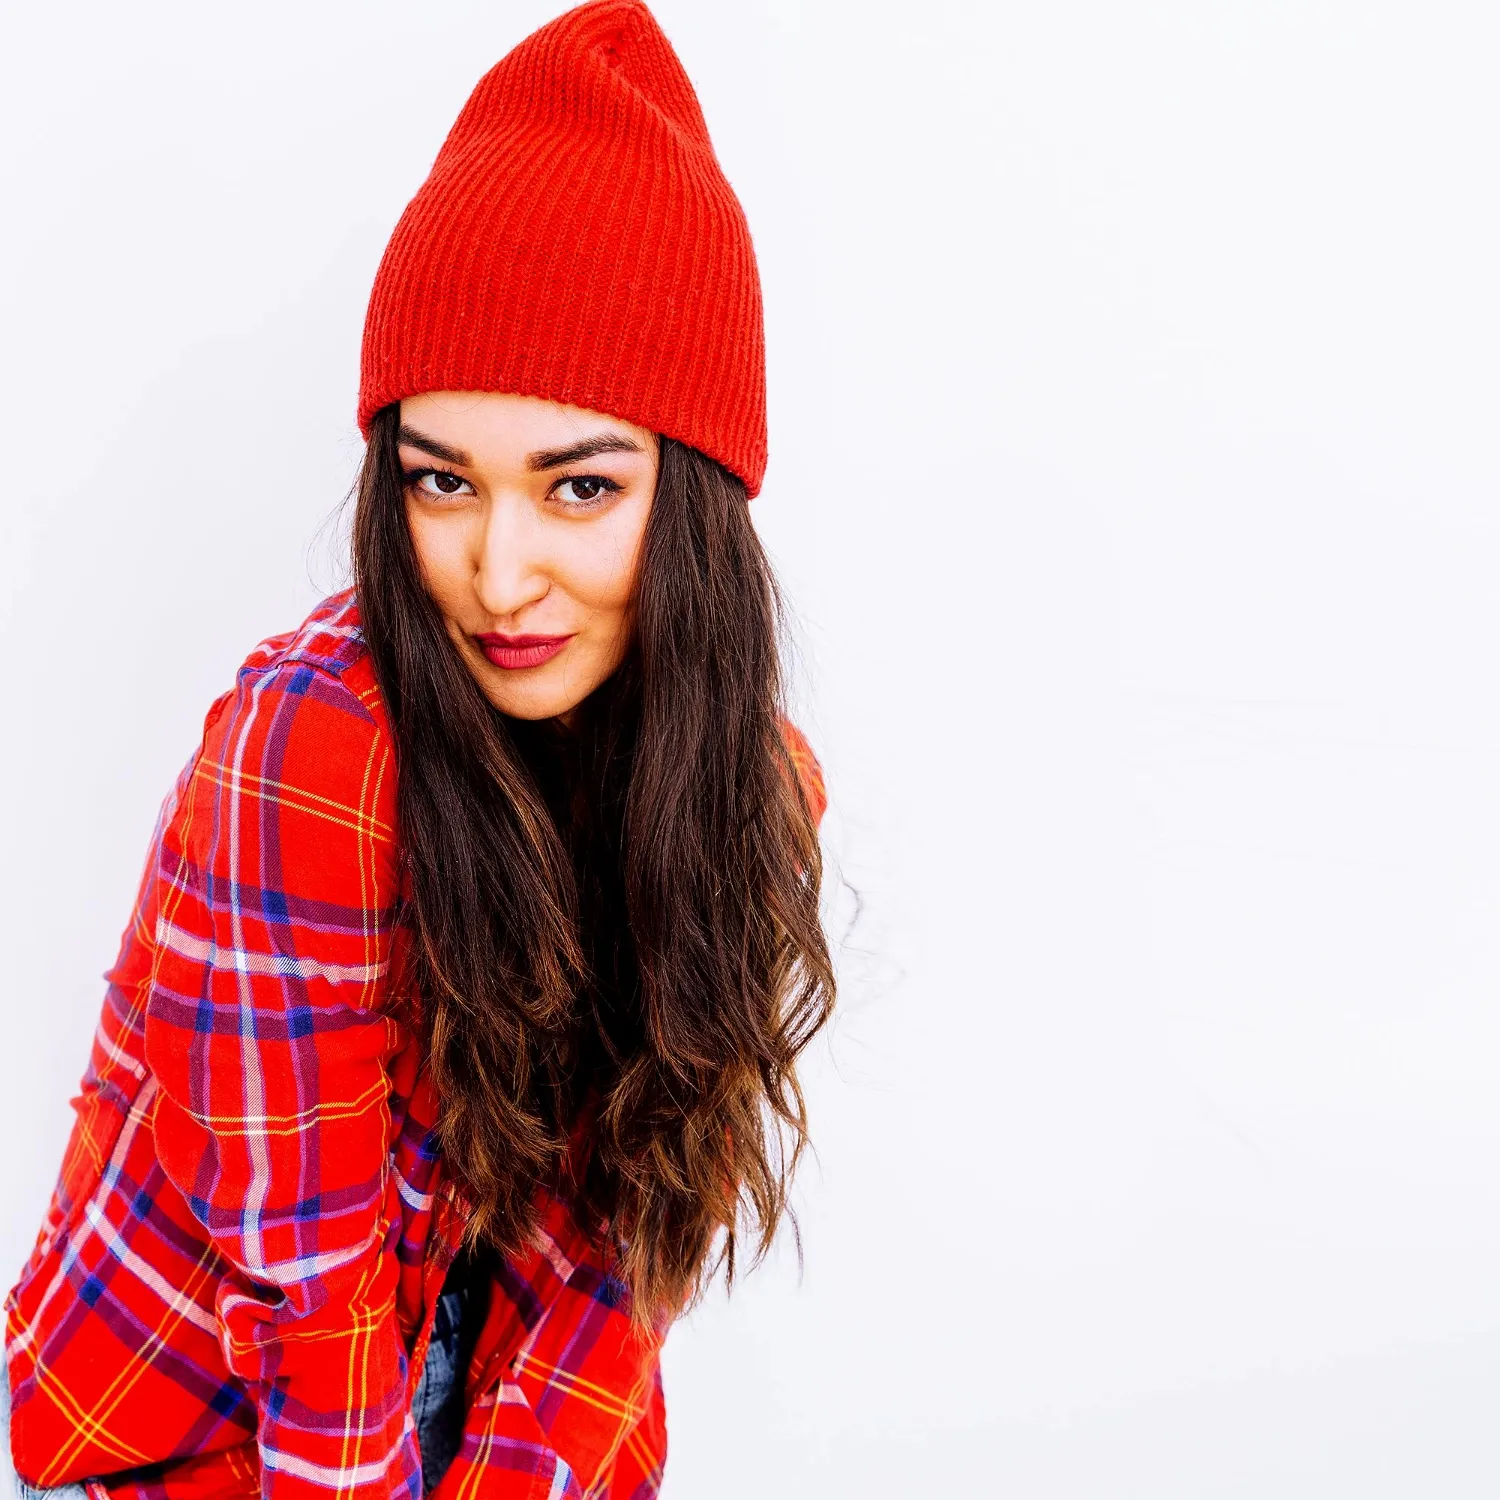 Stylish brunette girl urban fashion look checkered shirt and beanie cap red vibes